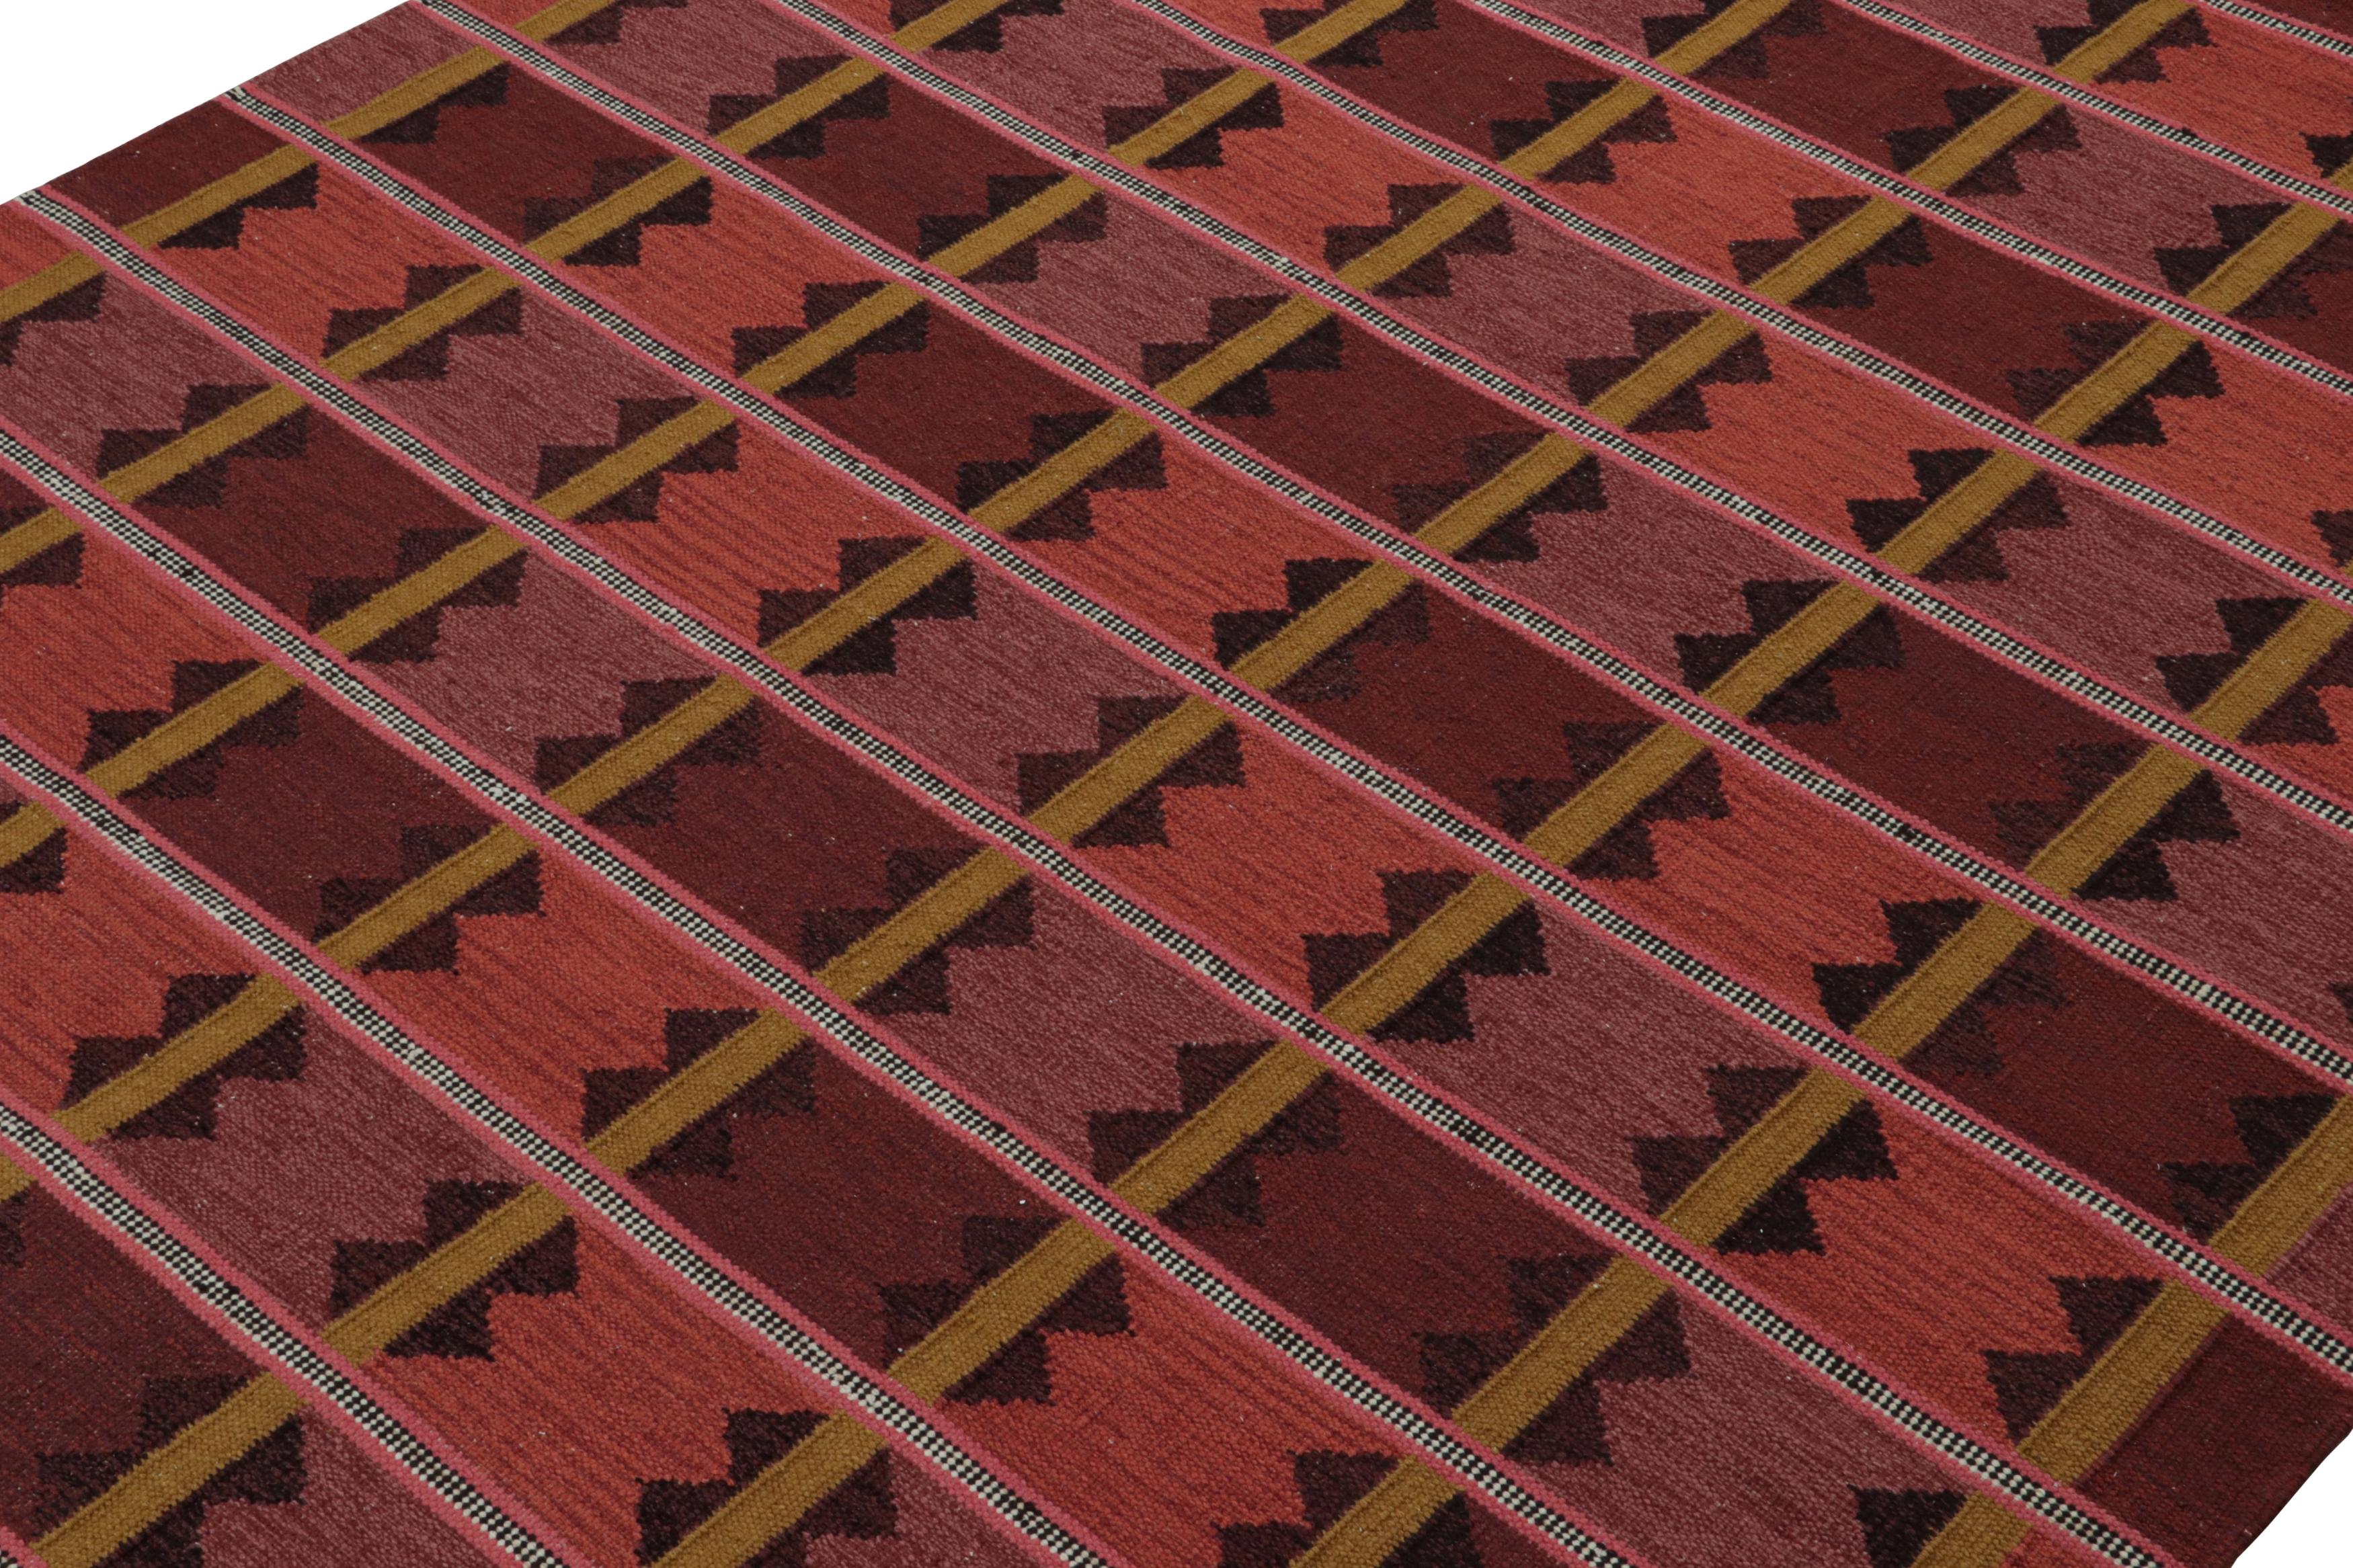 A smart 9x12 Swedish style kilim from our award-winning Scandinavian flat weave collection. Handwoven in wool. 

On the Design: 

This rug enjoys geometric patterns in enticing tones of red with gold. Keen eyes will admire undyed, natural yarns